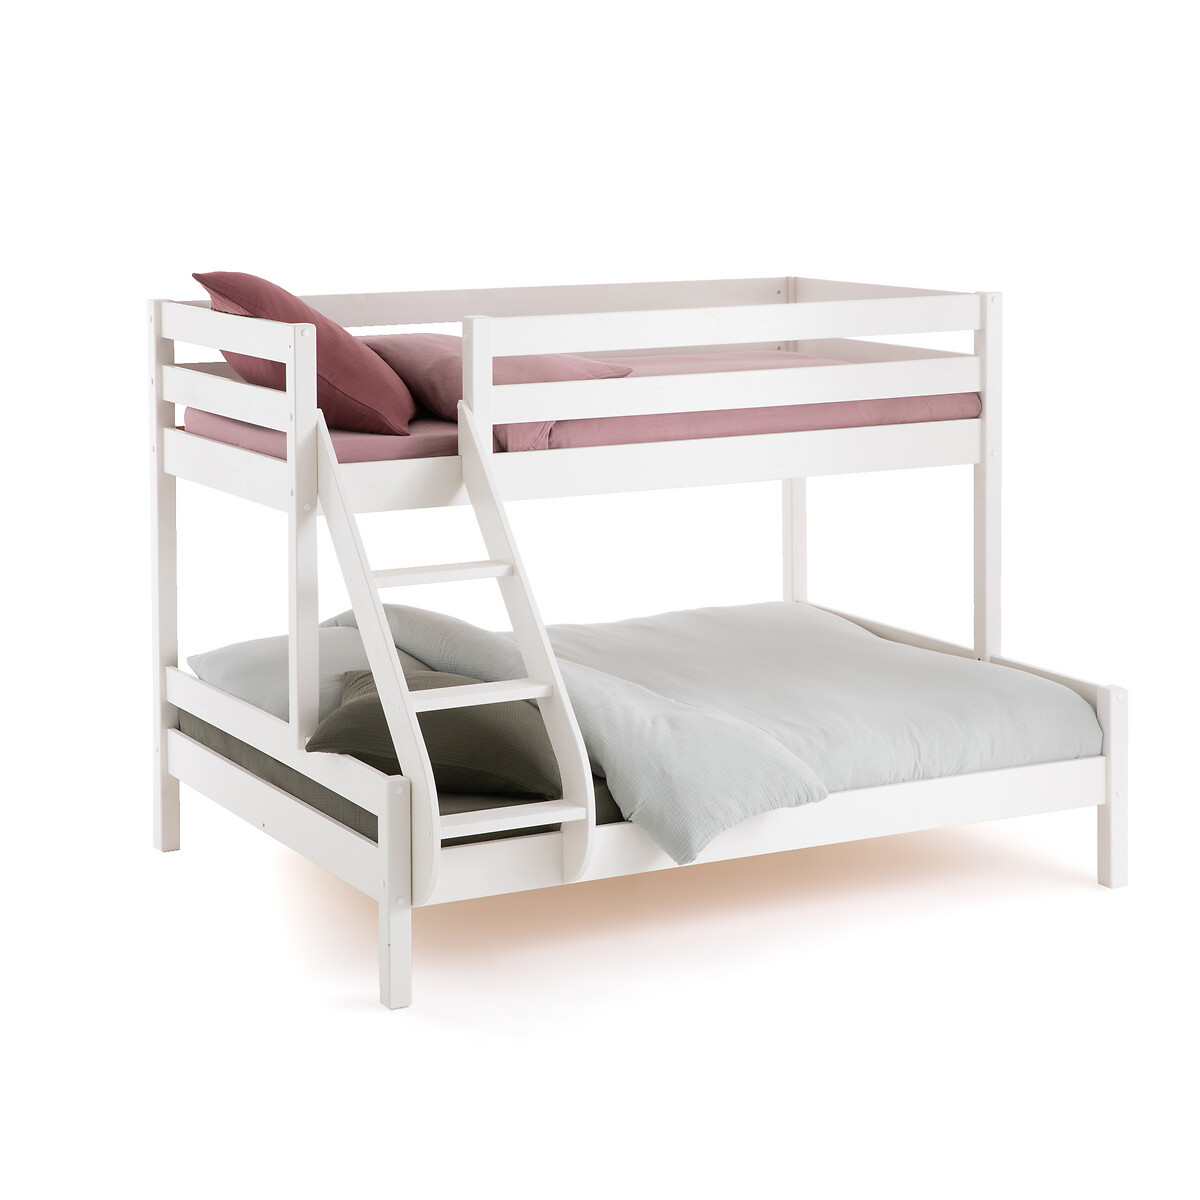 Triple Sleeper Pine Bunk Bed With Bases, Bunk Bed Base